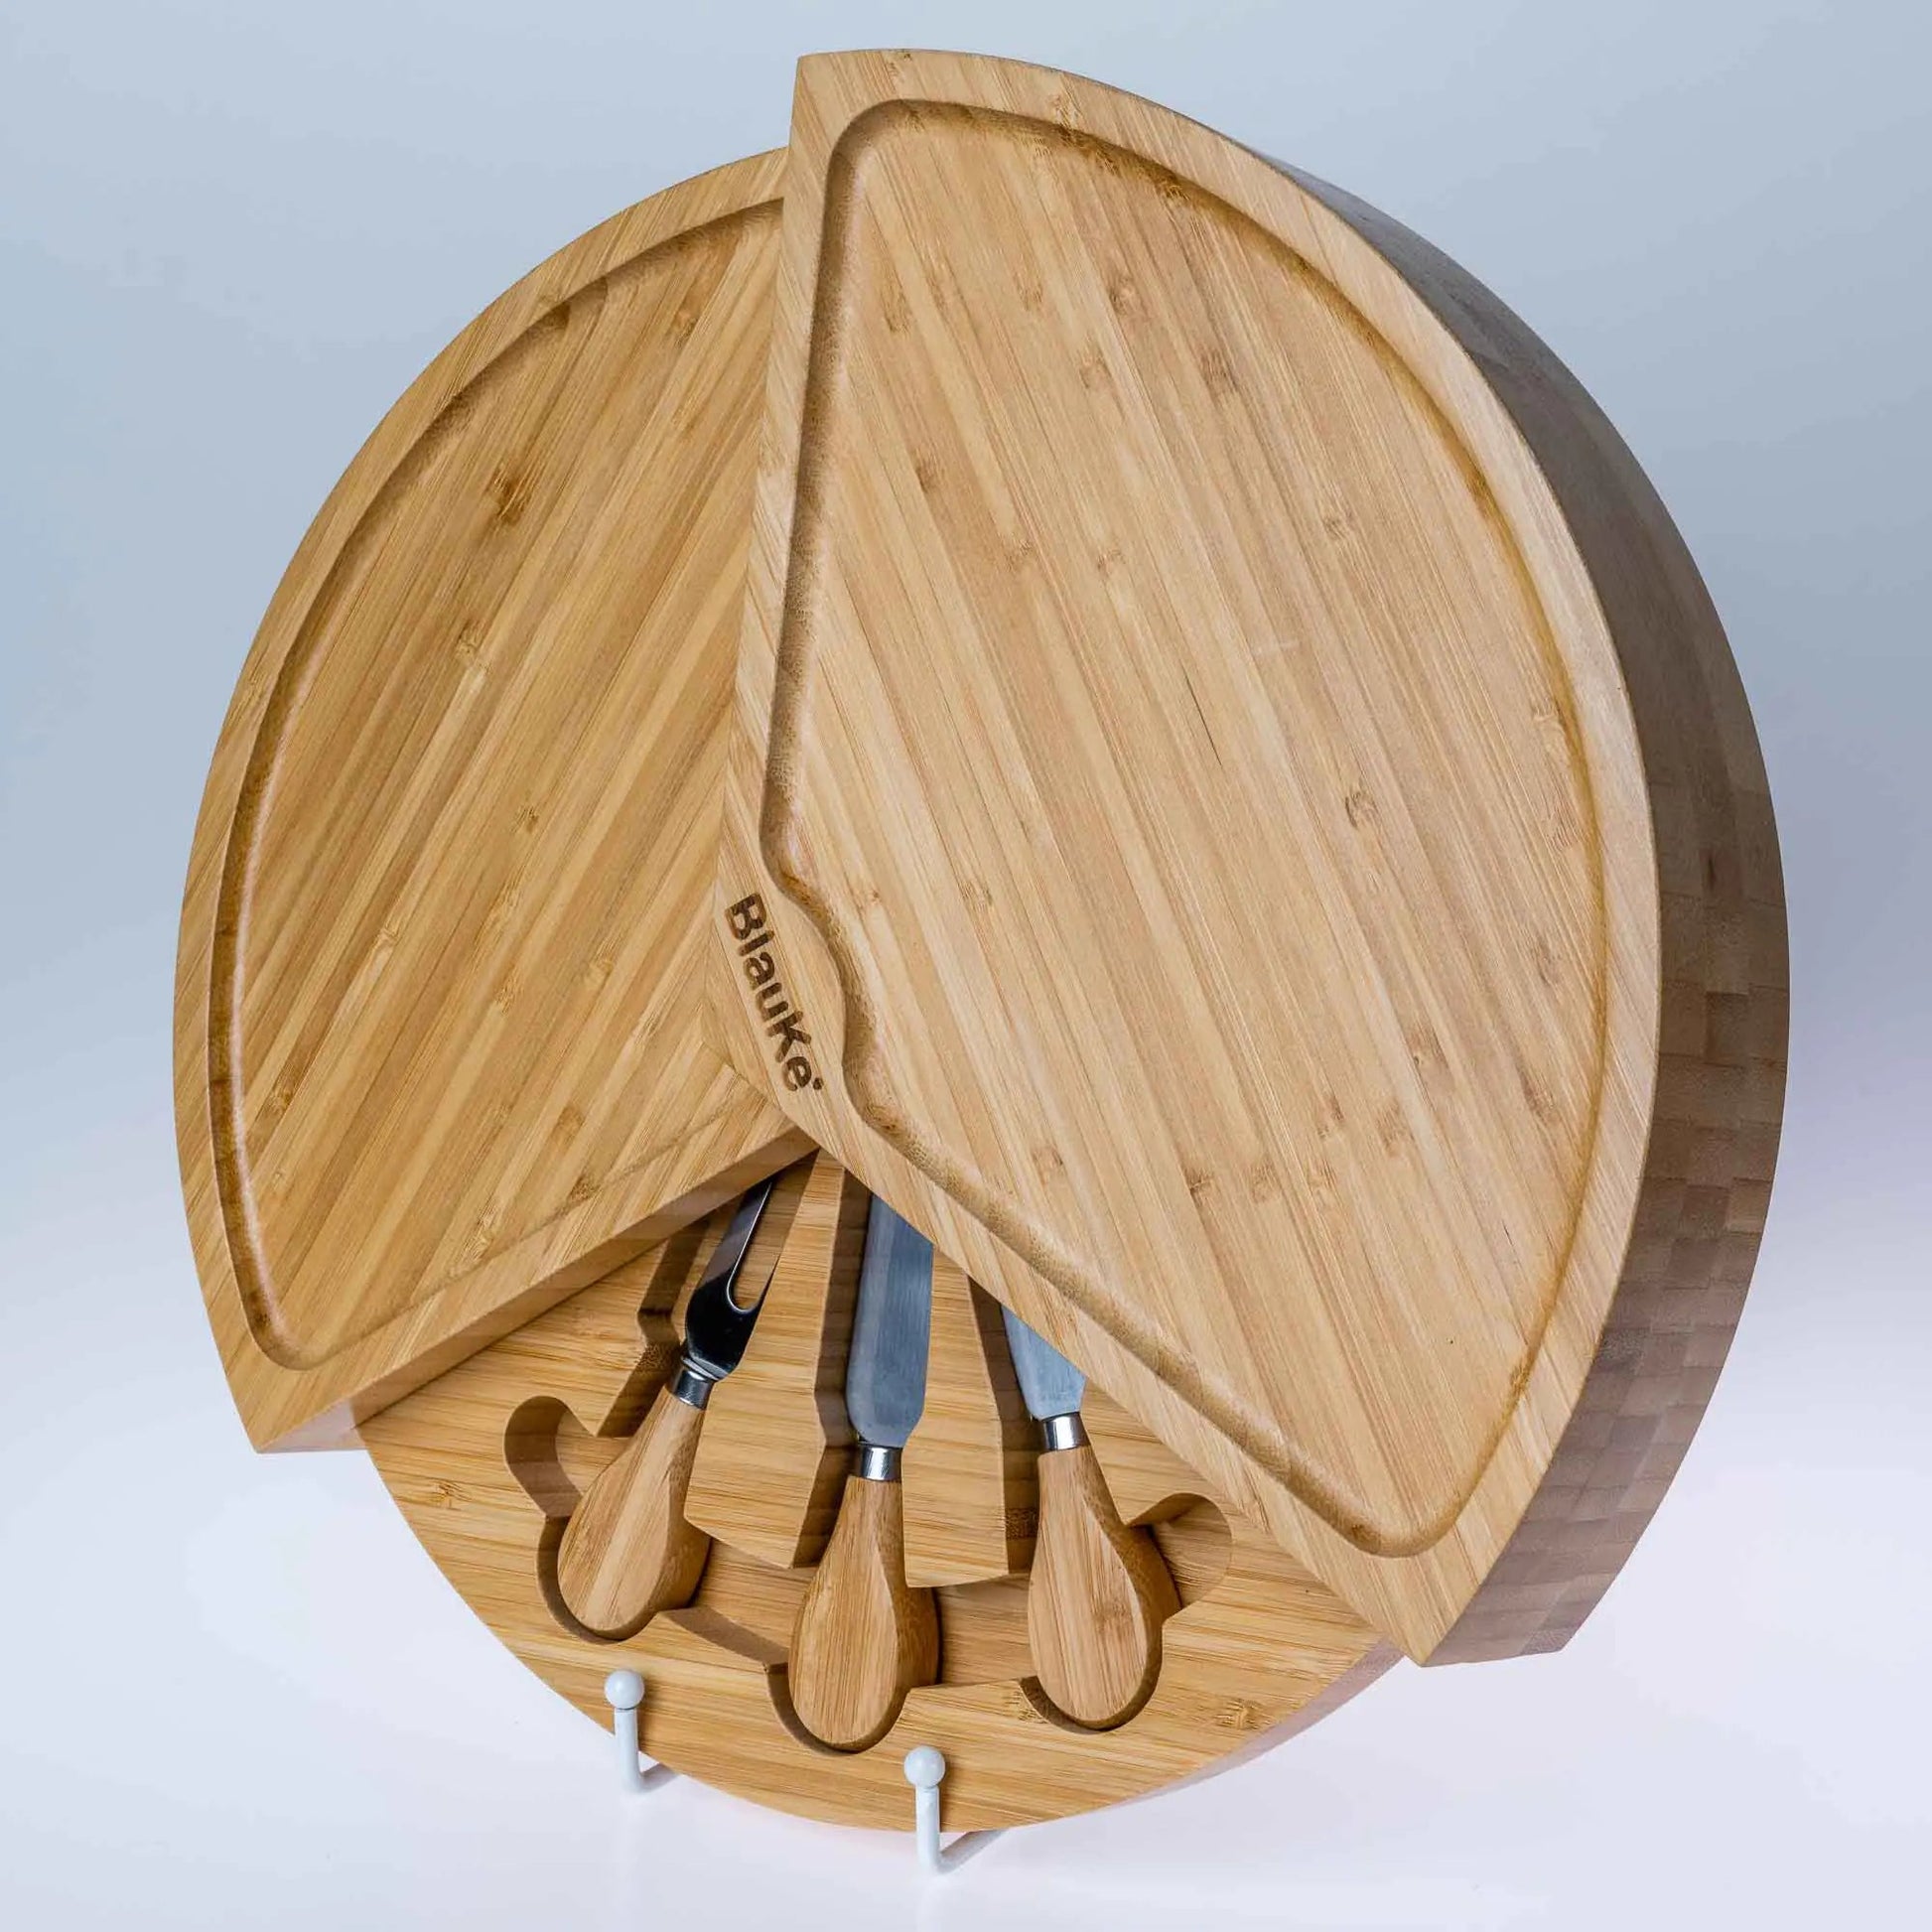 Bamboo Cheese Board and Knife Set - 14 Inch Swiveling Charcuterie Board with Slide - Out Drawer - Cheese Serving Platter, Round Serving Tray - ShopElegancyBamboo charcuterie boardBamboo Cheese Board and Knife Set - 14 Inch Swiveling Charcuterie Board with Slide - Out Drawer - Cheese Serving Platter, Round Serving Tray